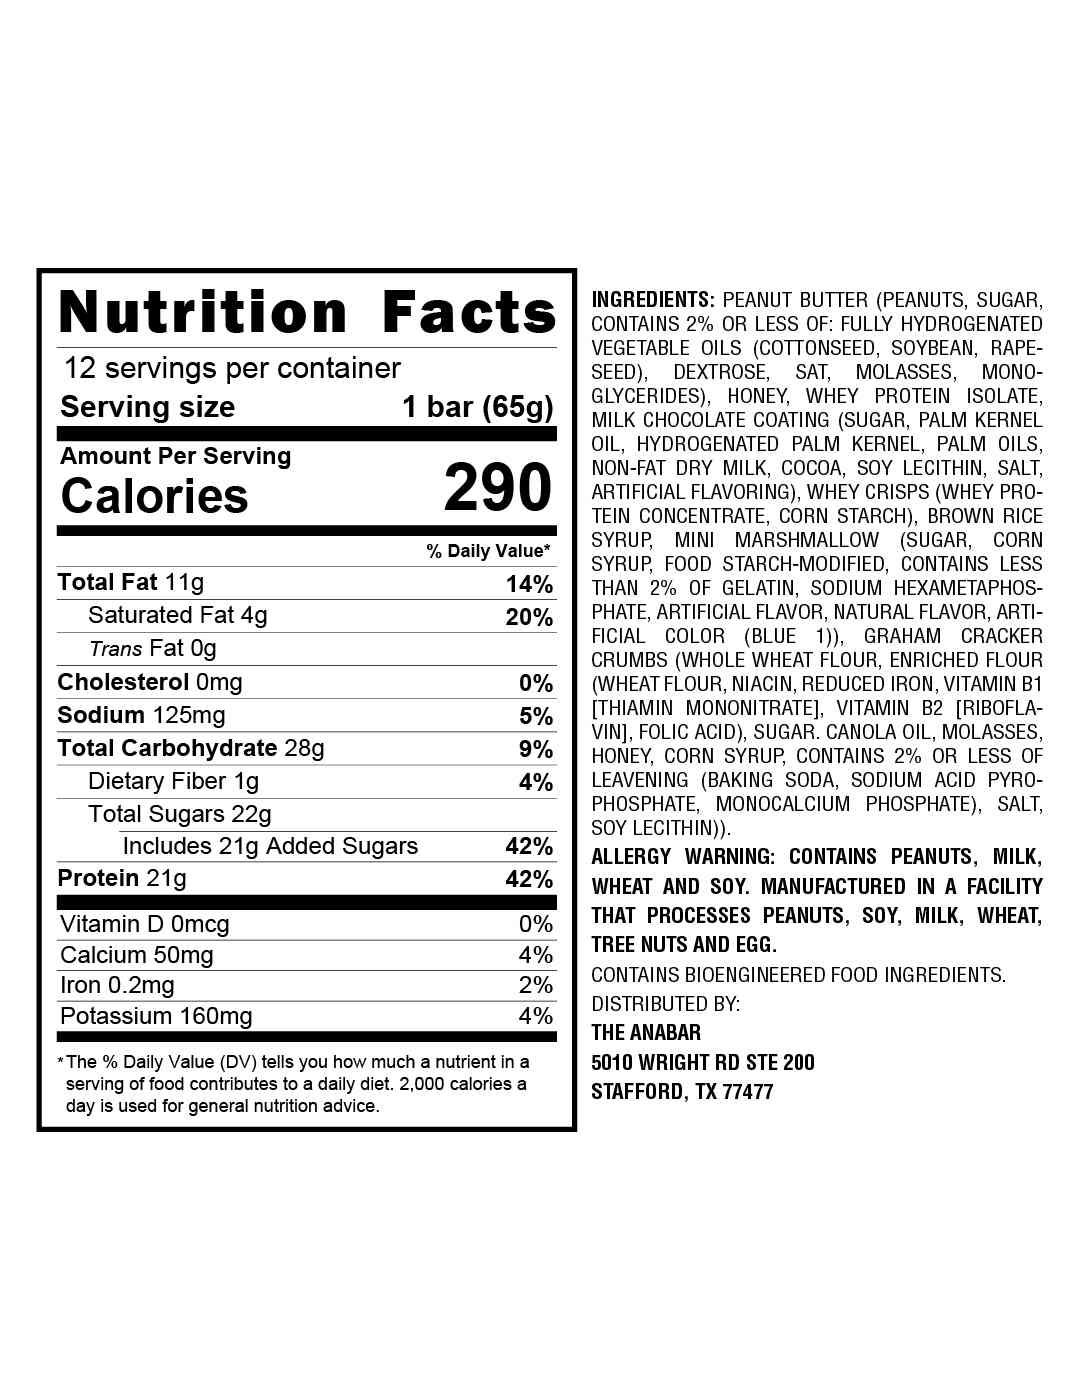 Anabar 21g Protein Performance Bar - Milk Chocolate Campfire S'mores; image 2 of 2